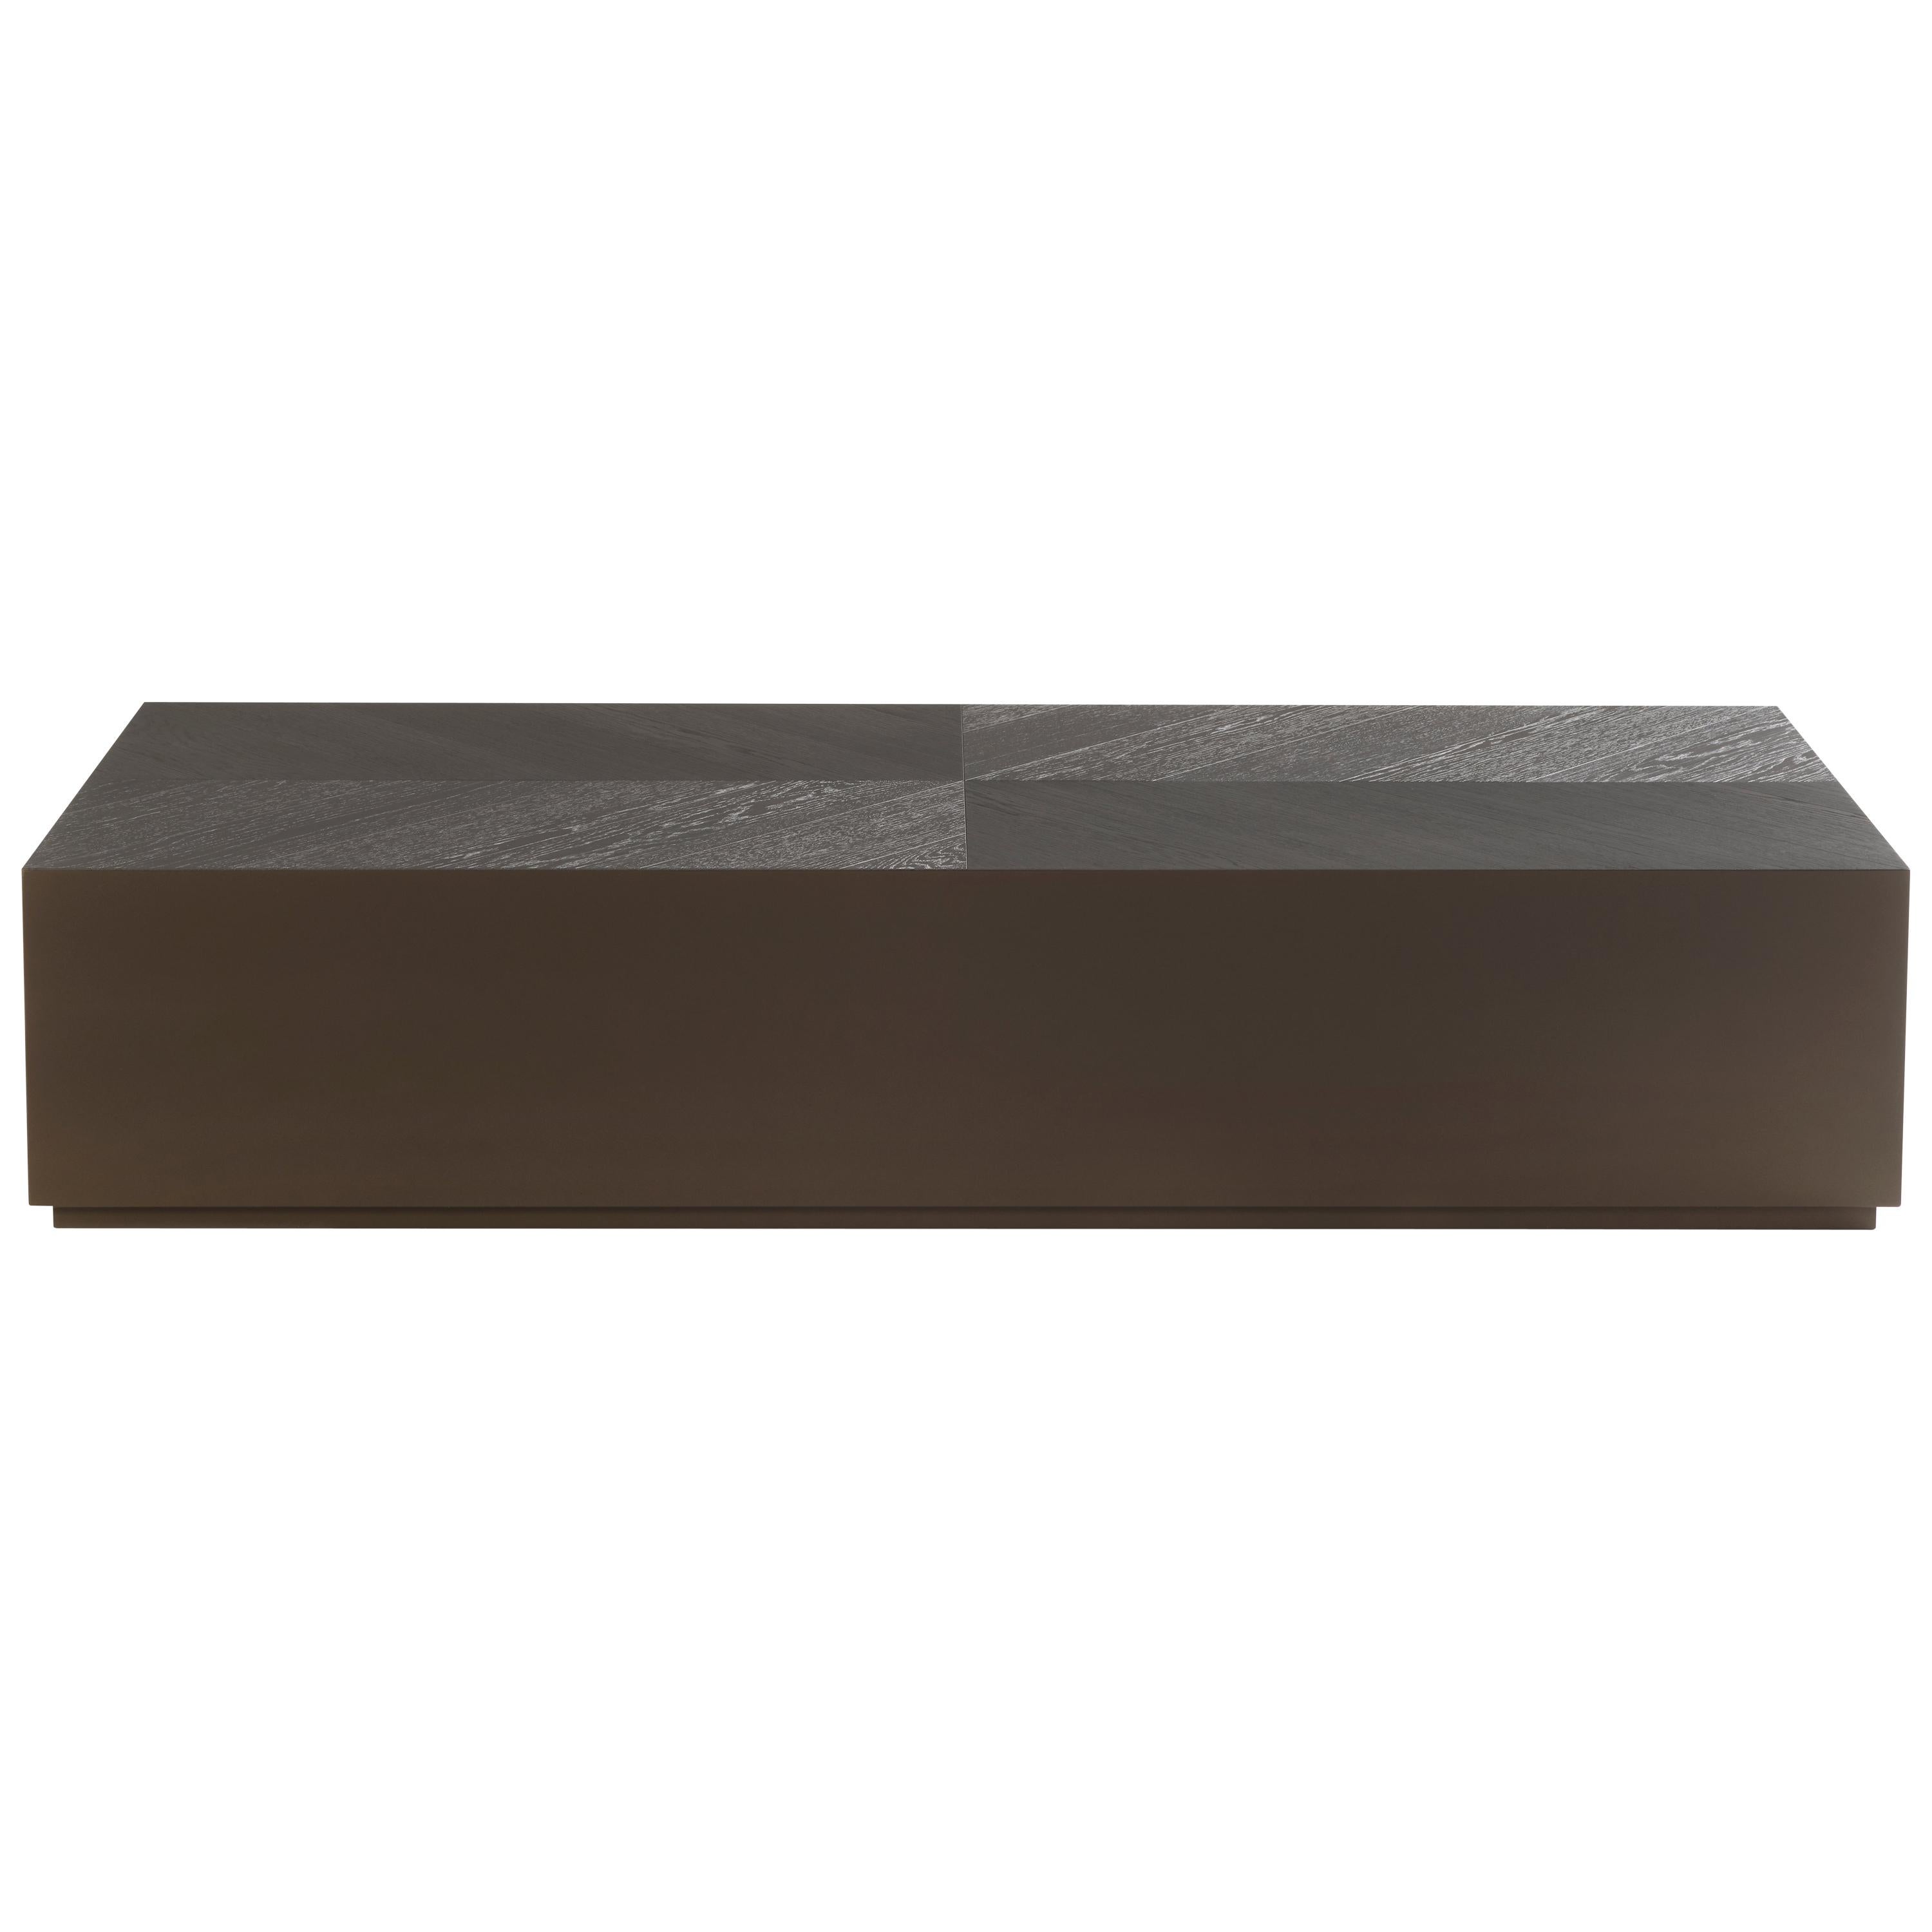 Basalt Coffee Table Design by Dami, The Netherlands